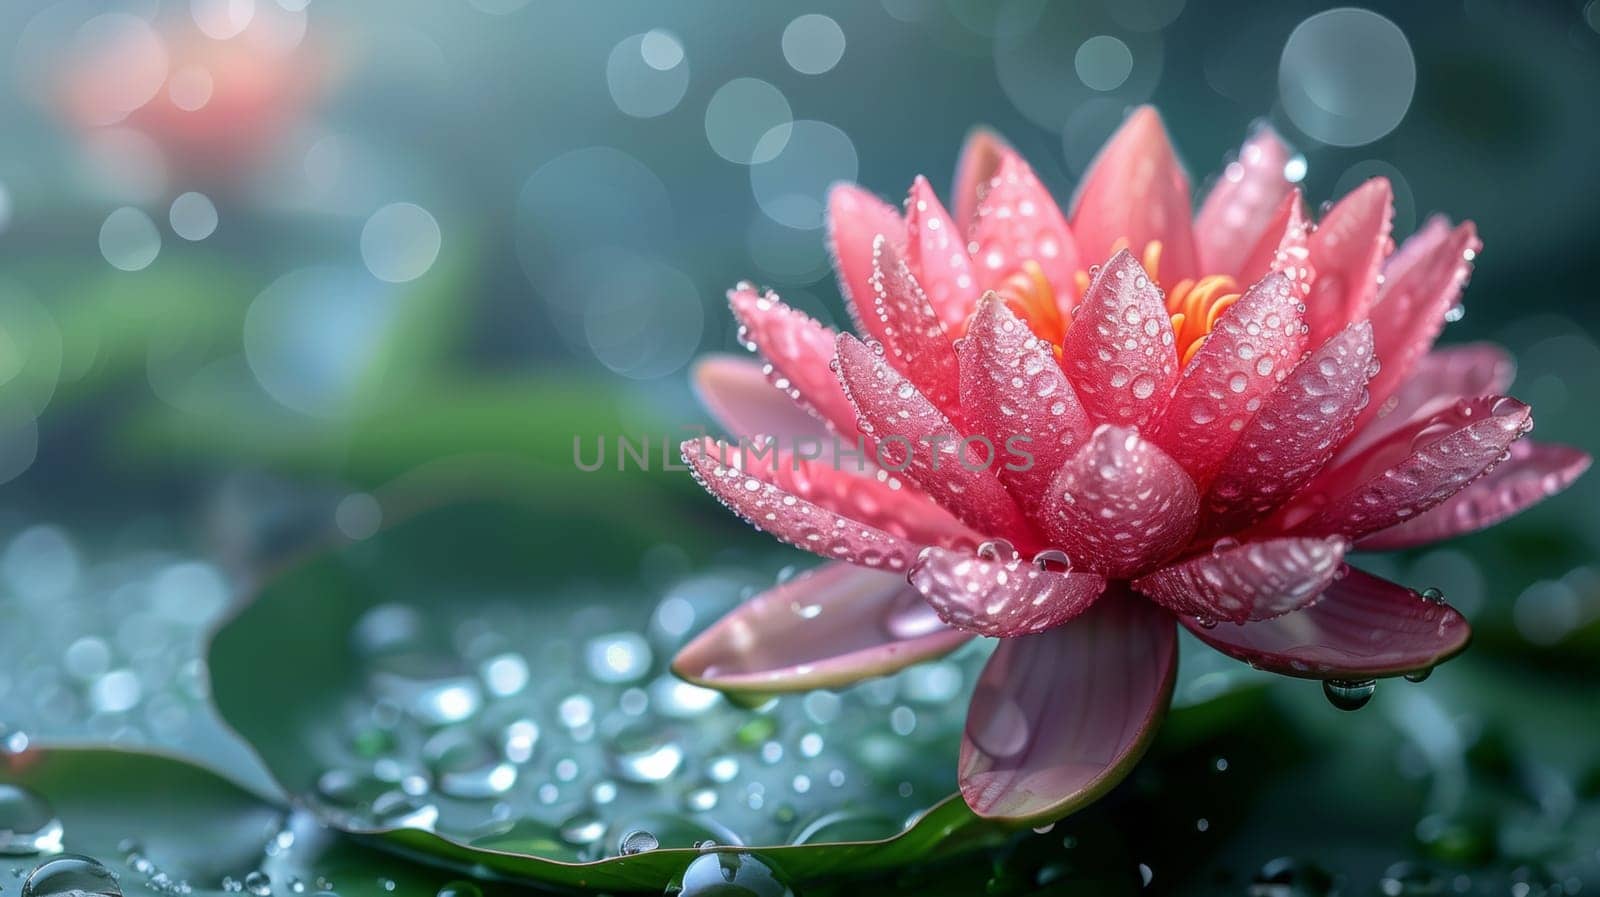 A pink flower with water droplets on it sitting in a pond